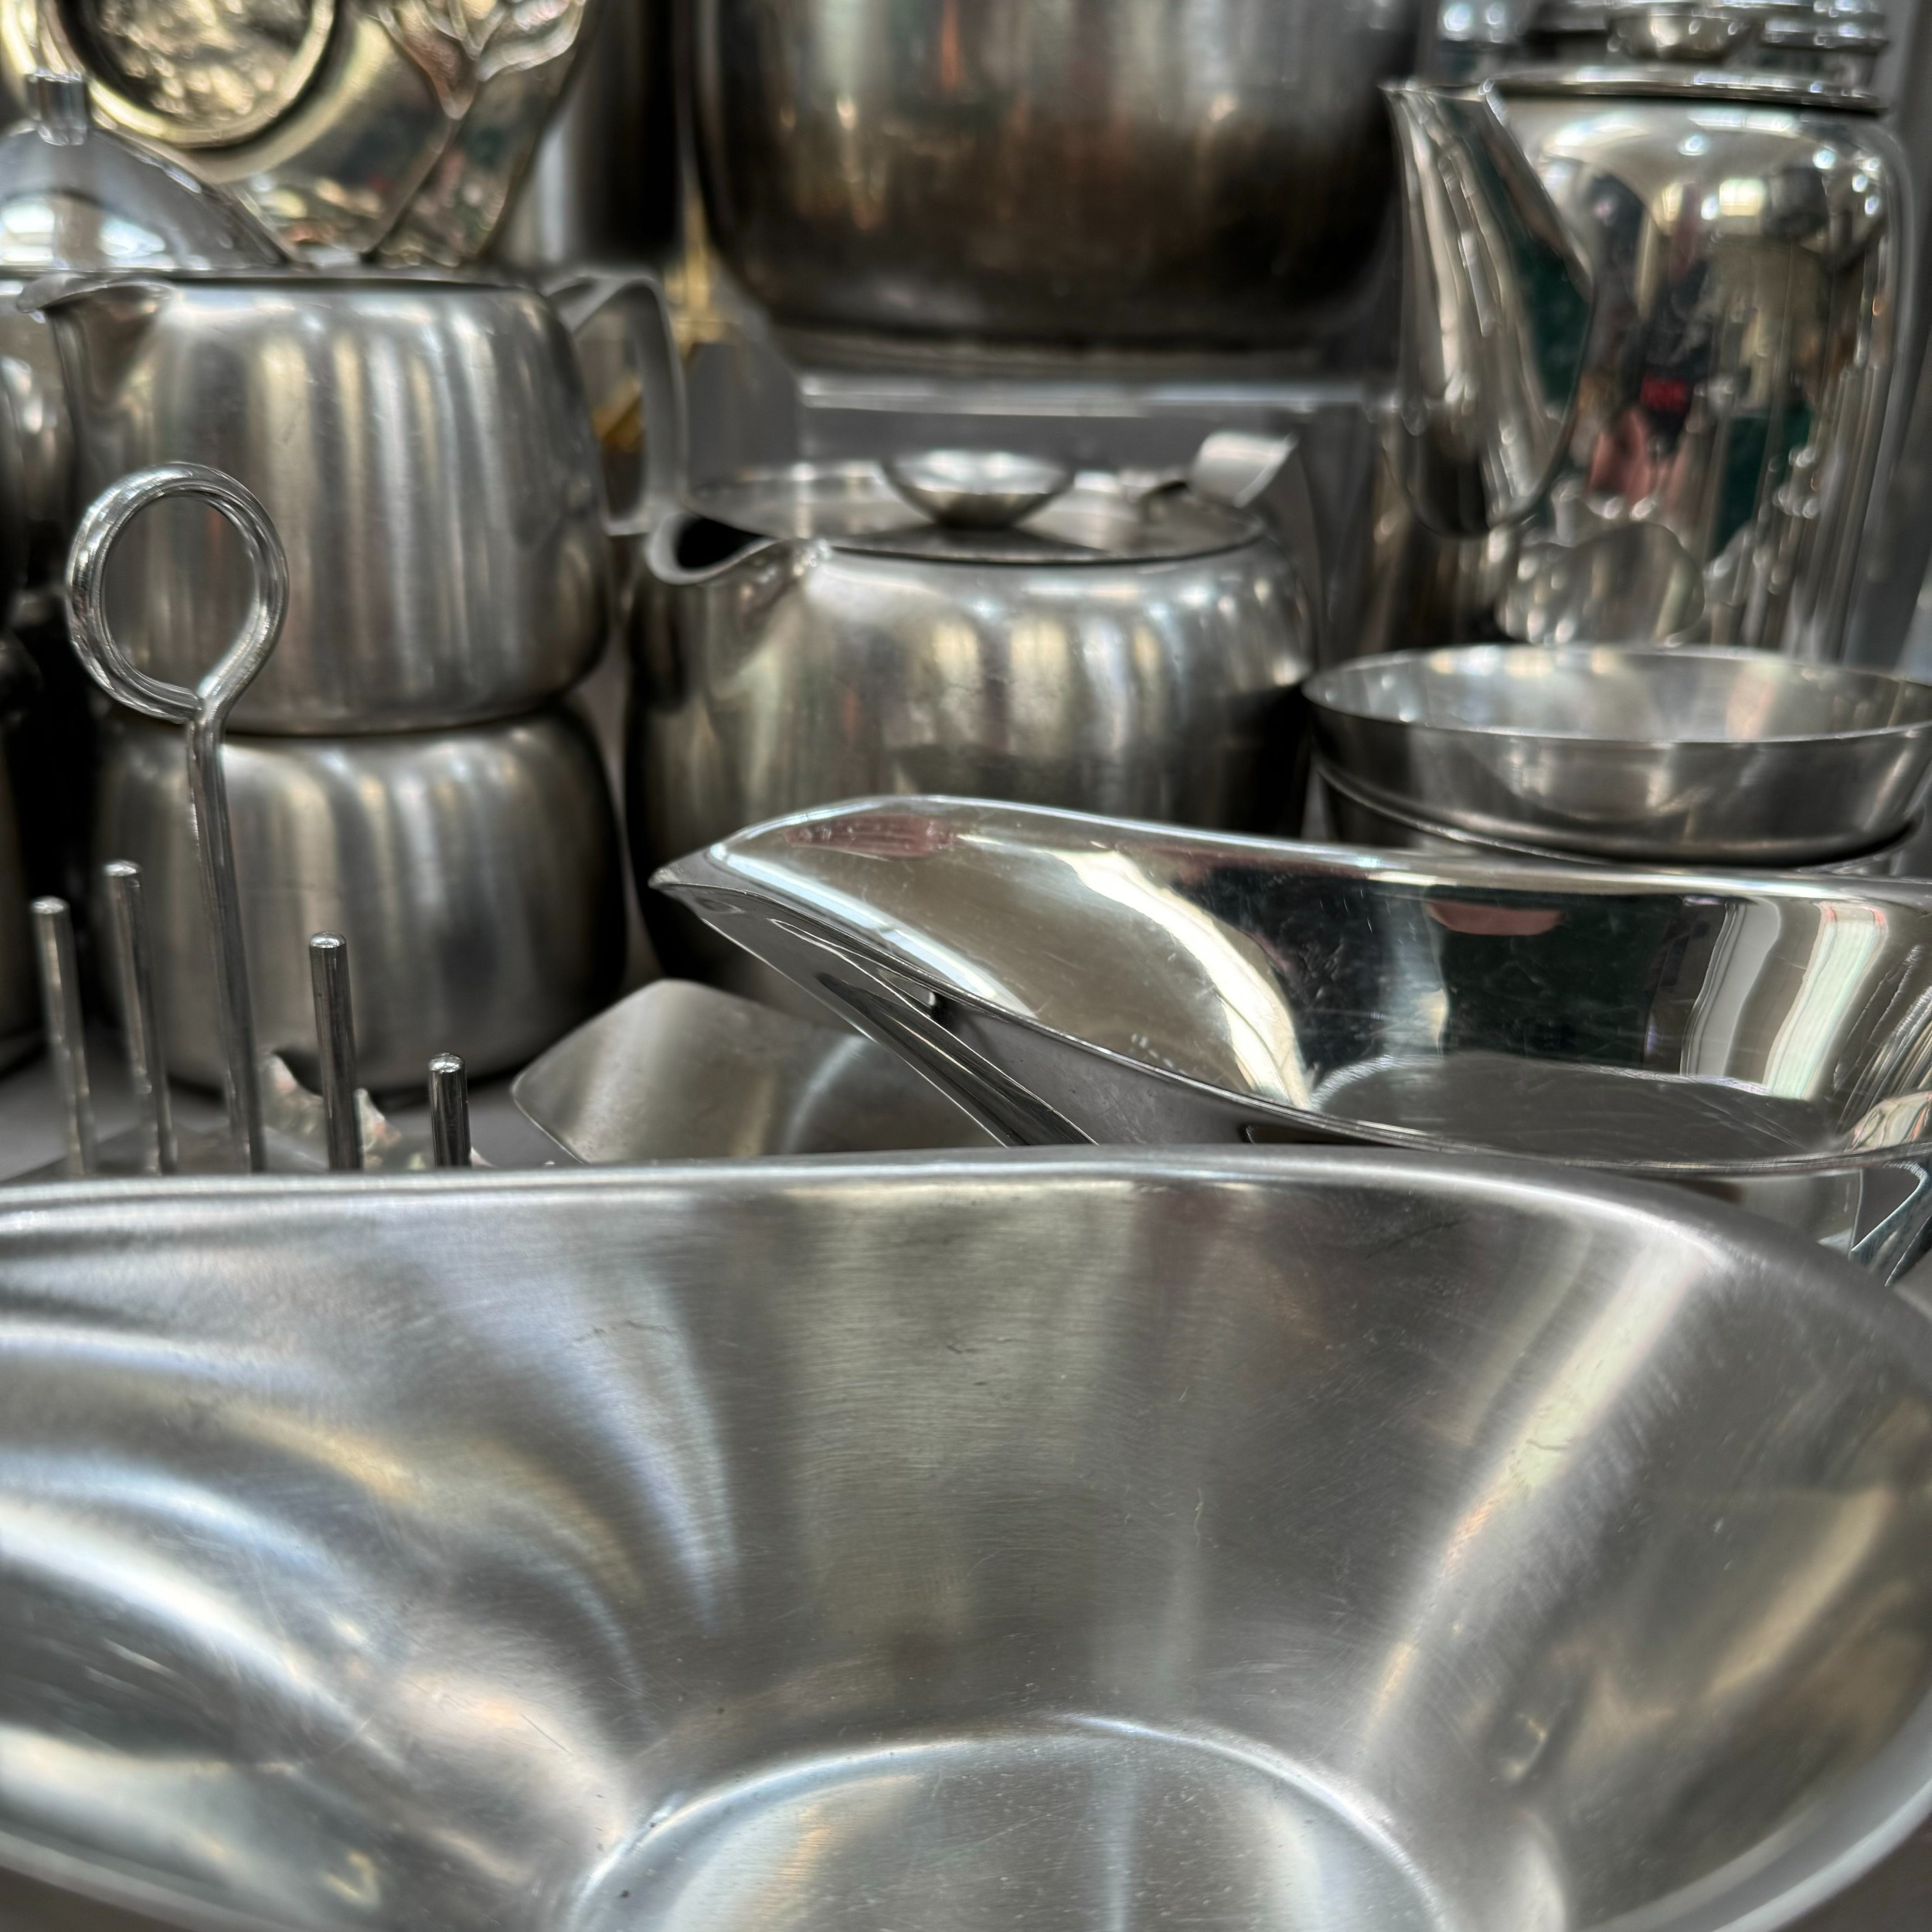 A large collection of stainless steel ware, teapot, hot water jug, coffee pot, storage jar, toast